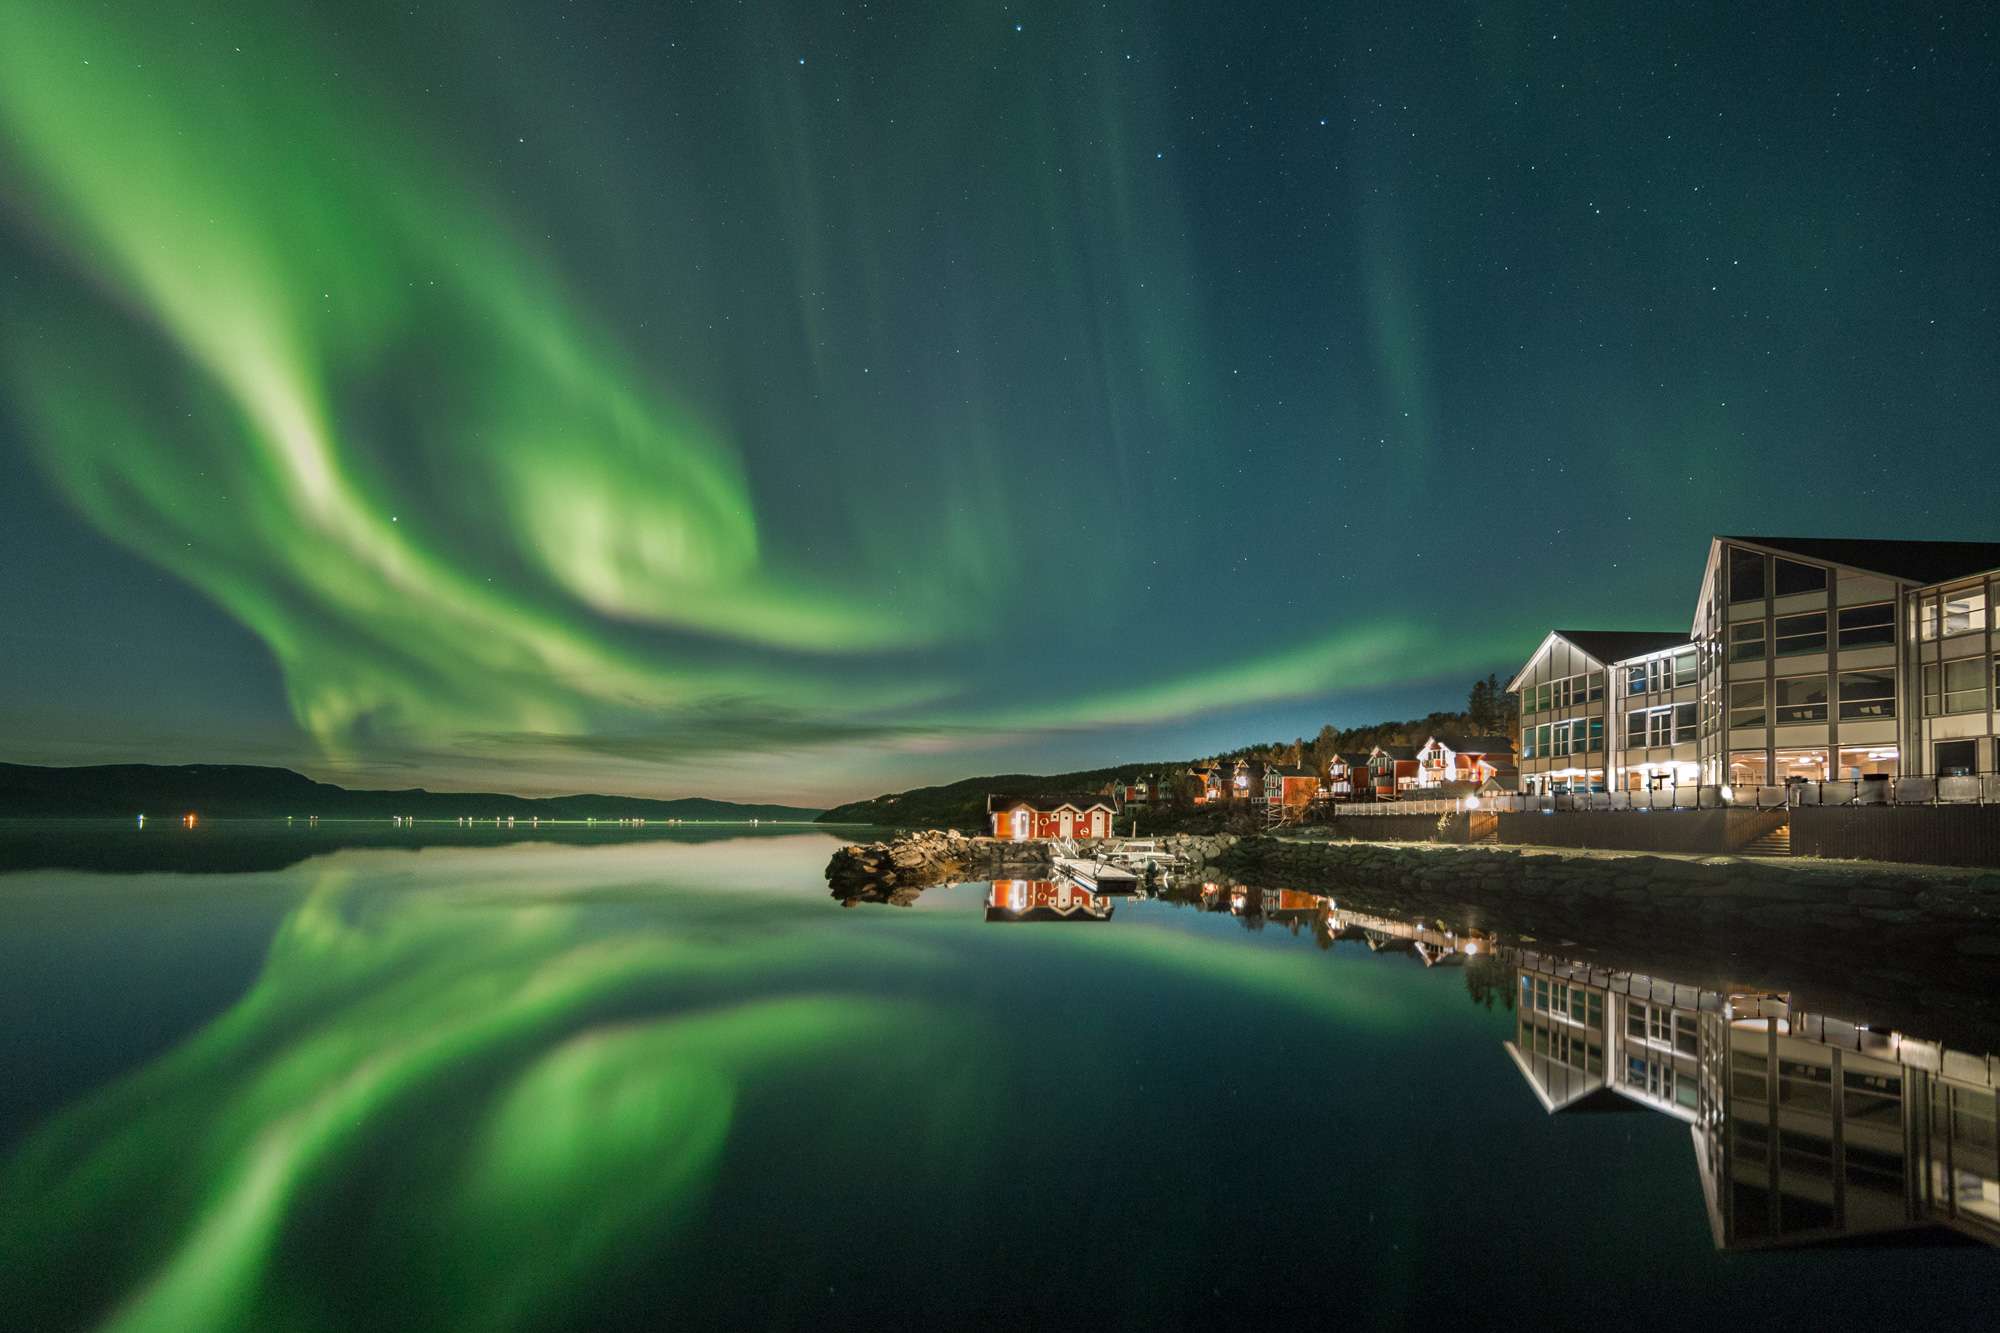 The Best Hotels To See The Northern Lights | World Blog